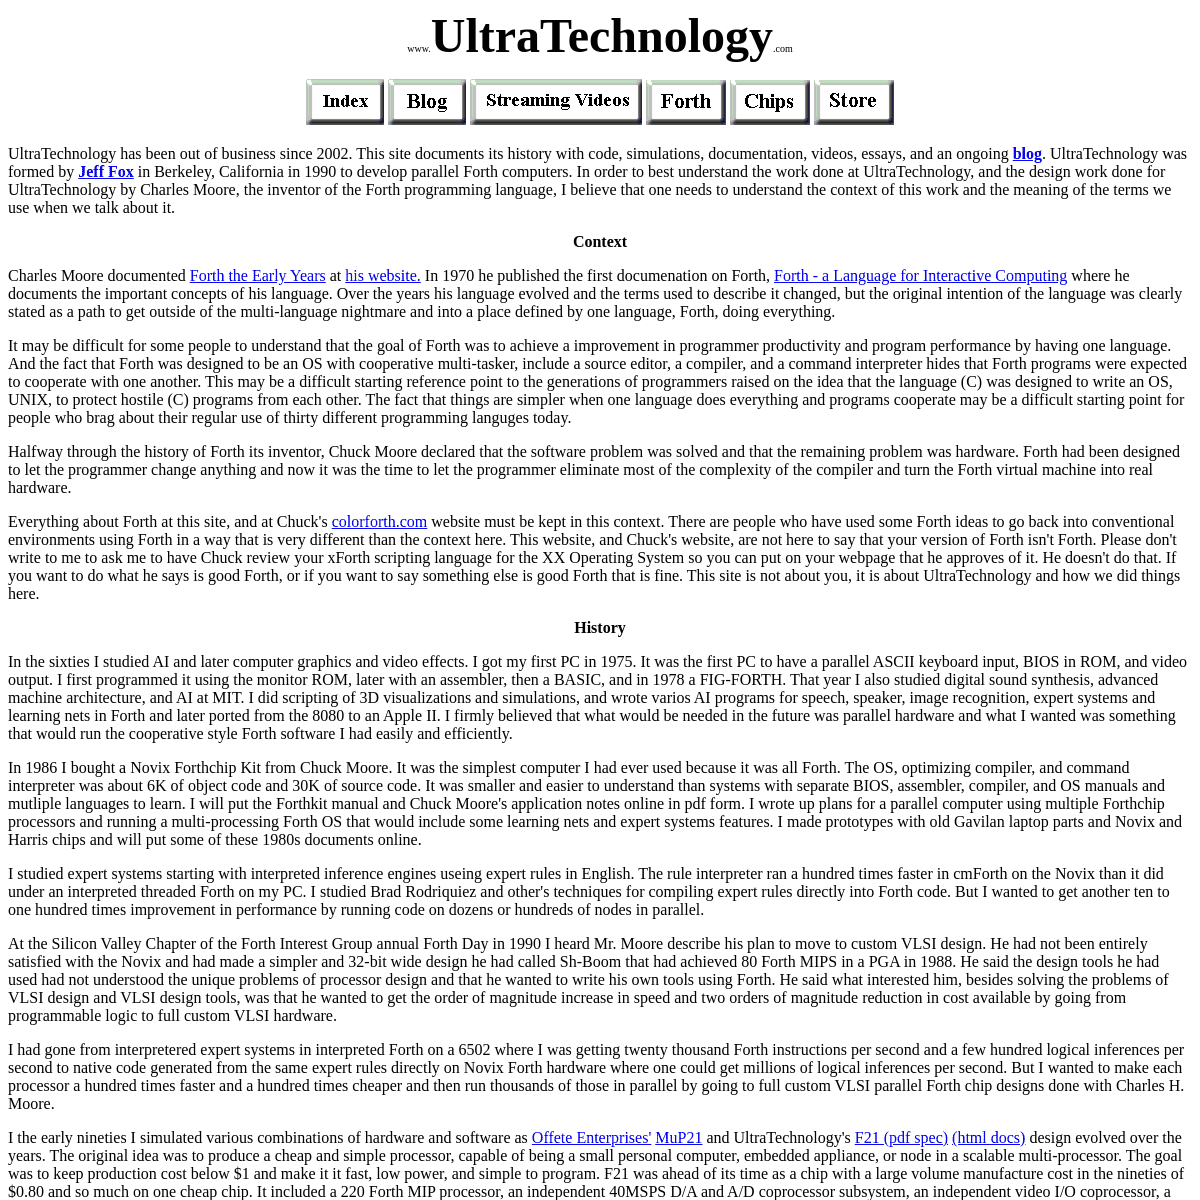 A complete backup of ultratechnology.com